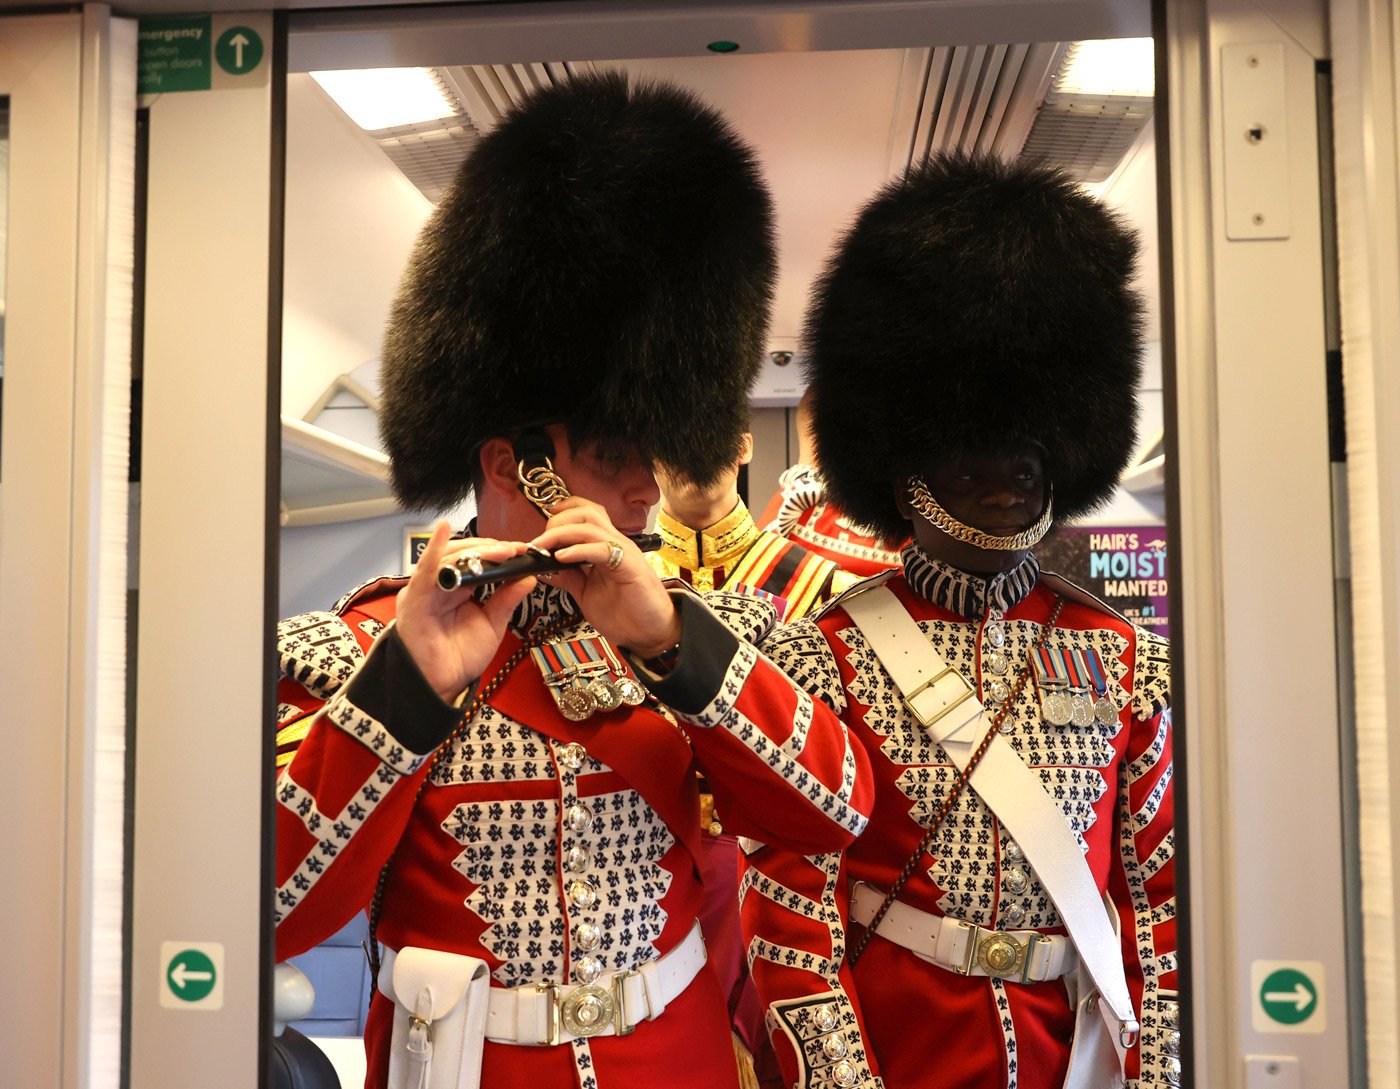 A member of the Armed Forces plays an instrument while on a train into London